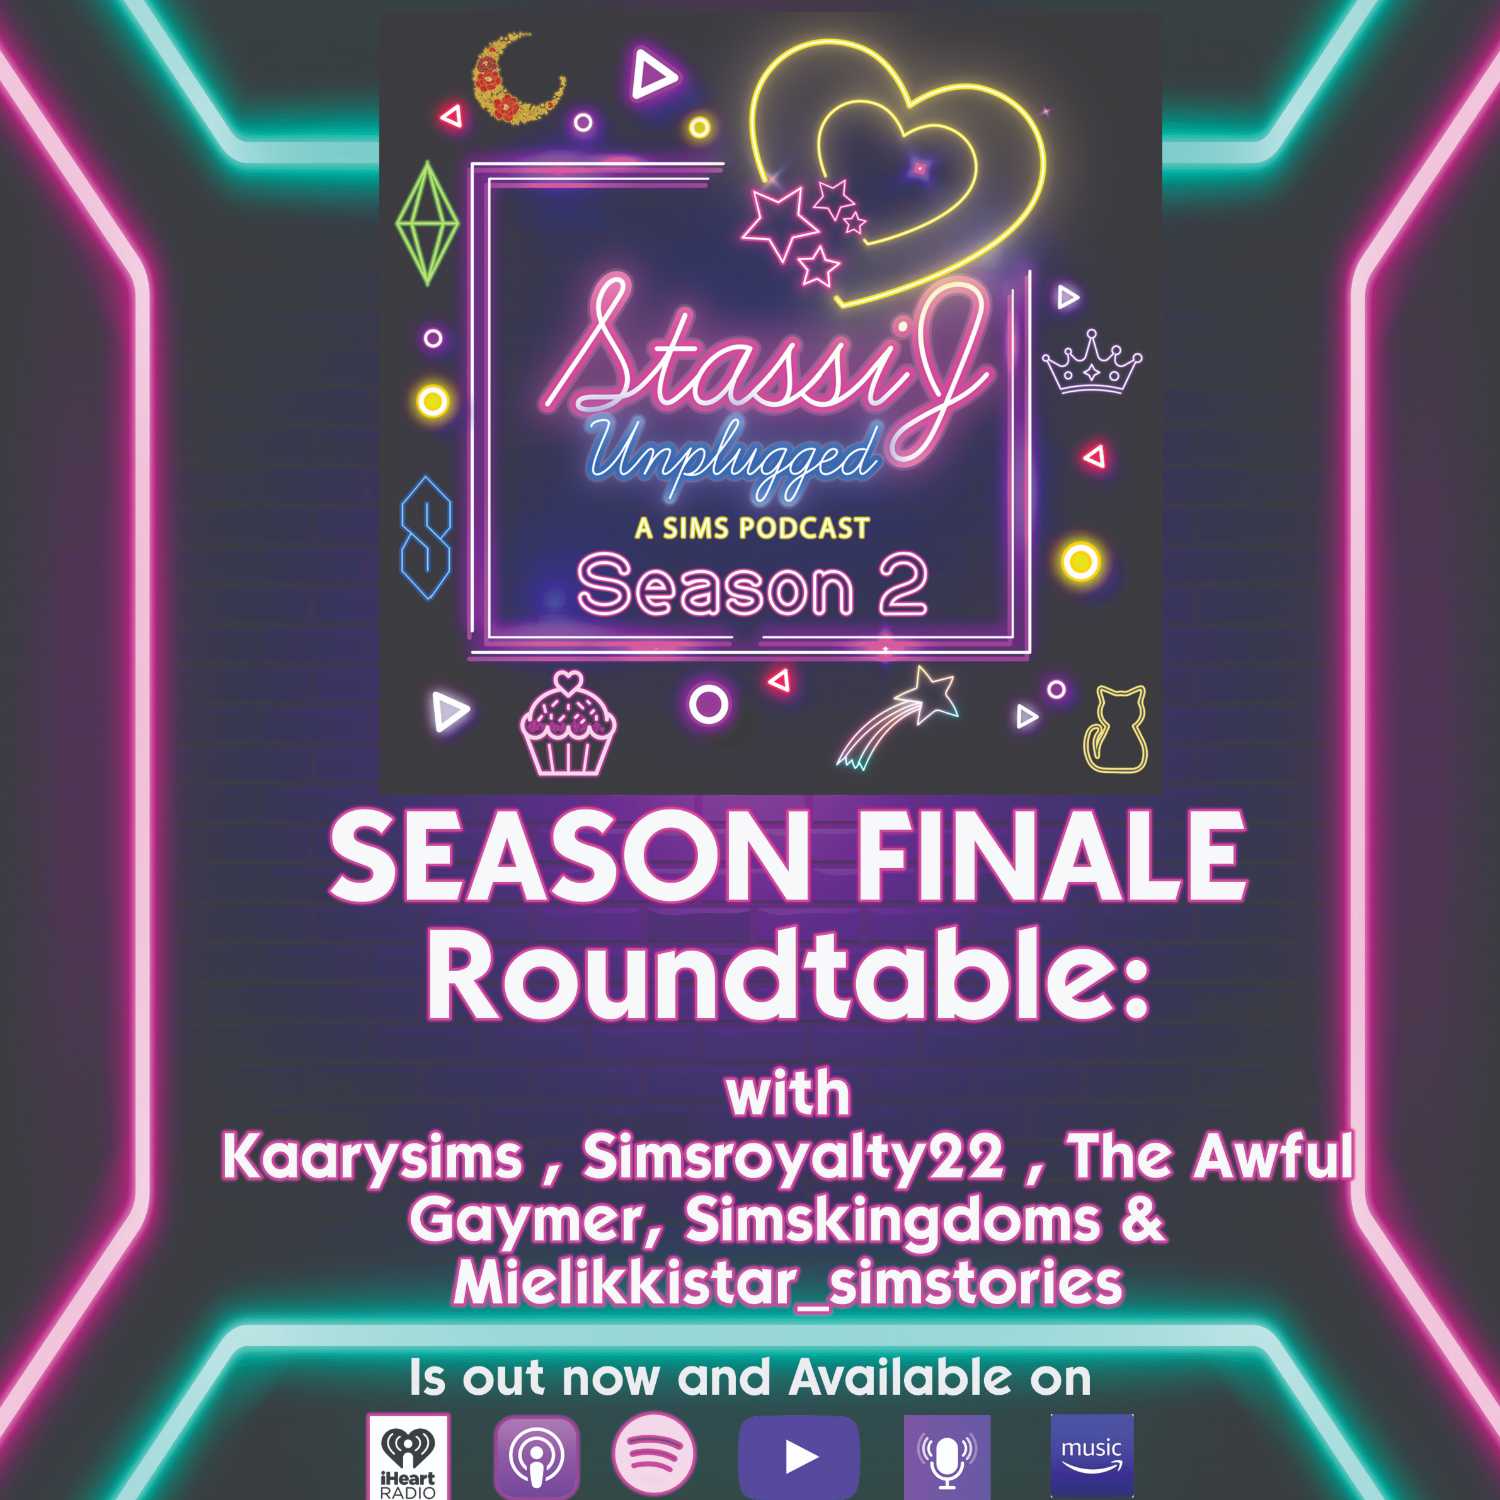 SEASON FINALE Roundtable: with Kaarysims , Simsroyalty22 , The Awful Gaymer, Simskingdoms & Mielikkistar_simstories